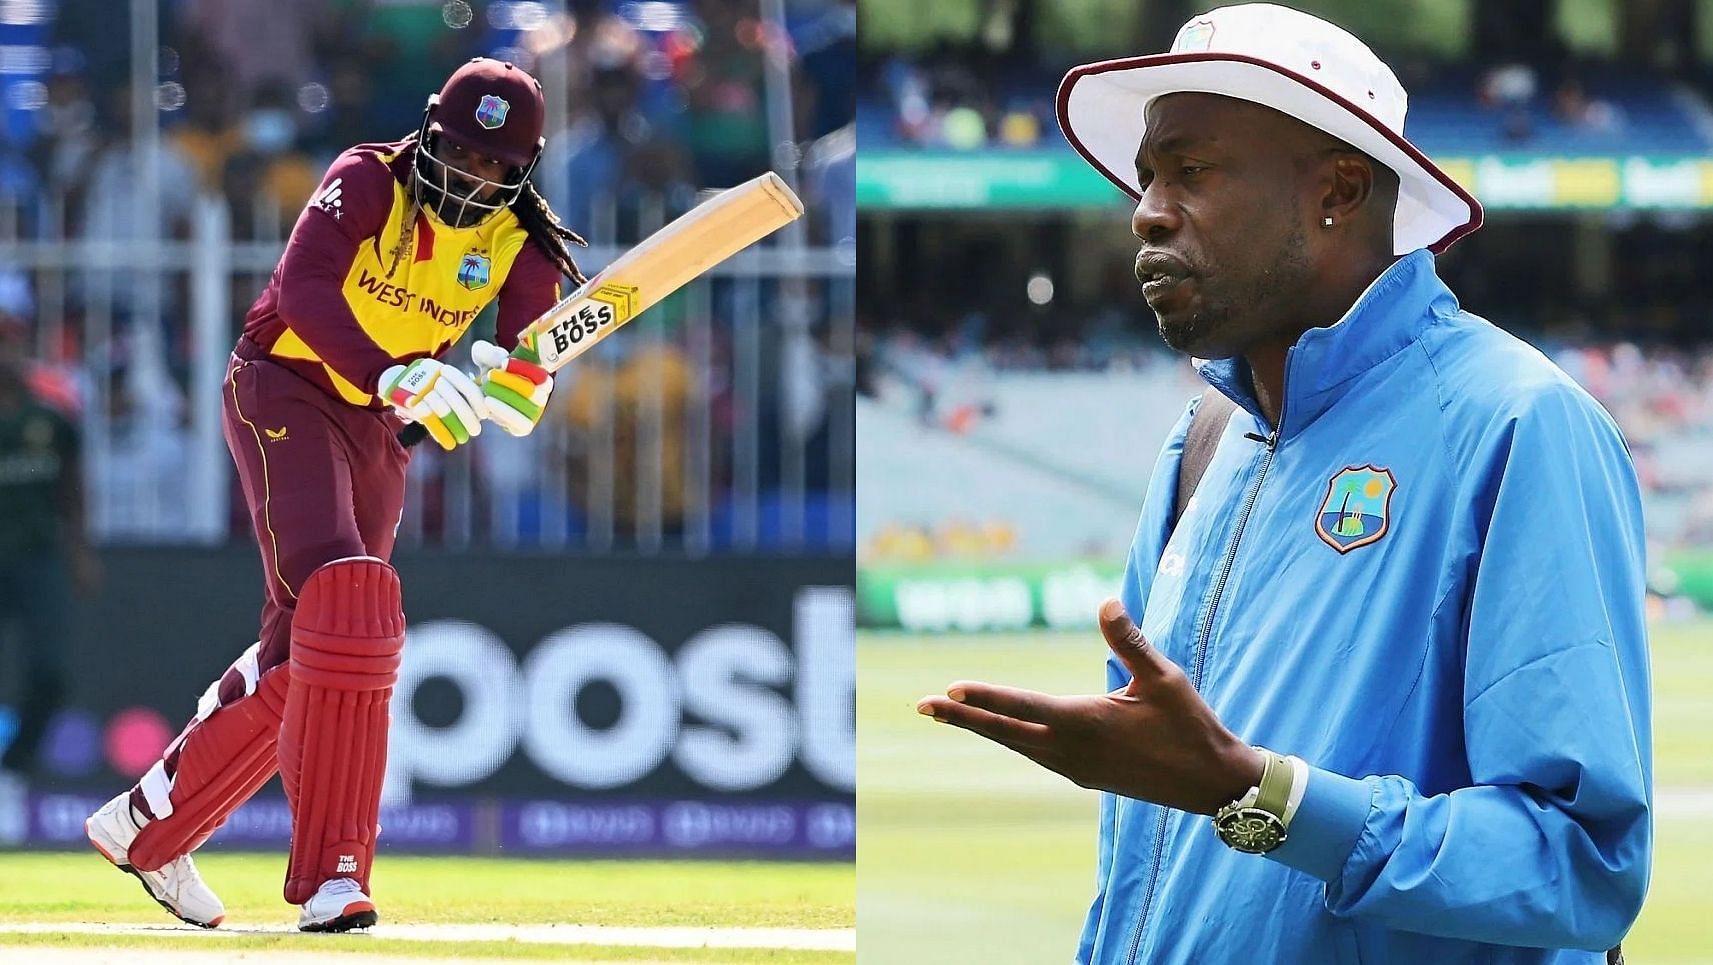 Chris Gayle (left) and Curtly Ambrose. Pics: Getty Images